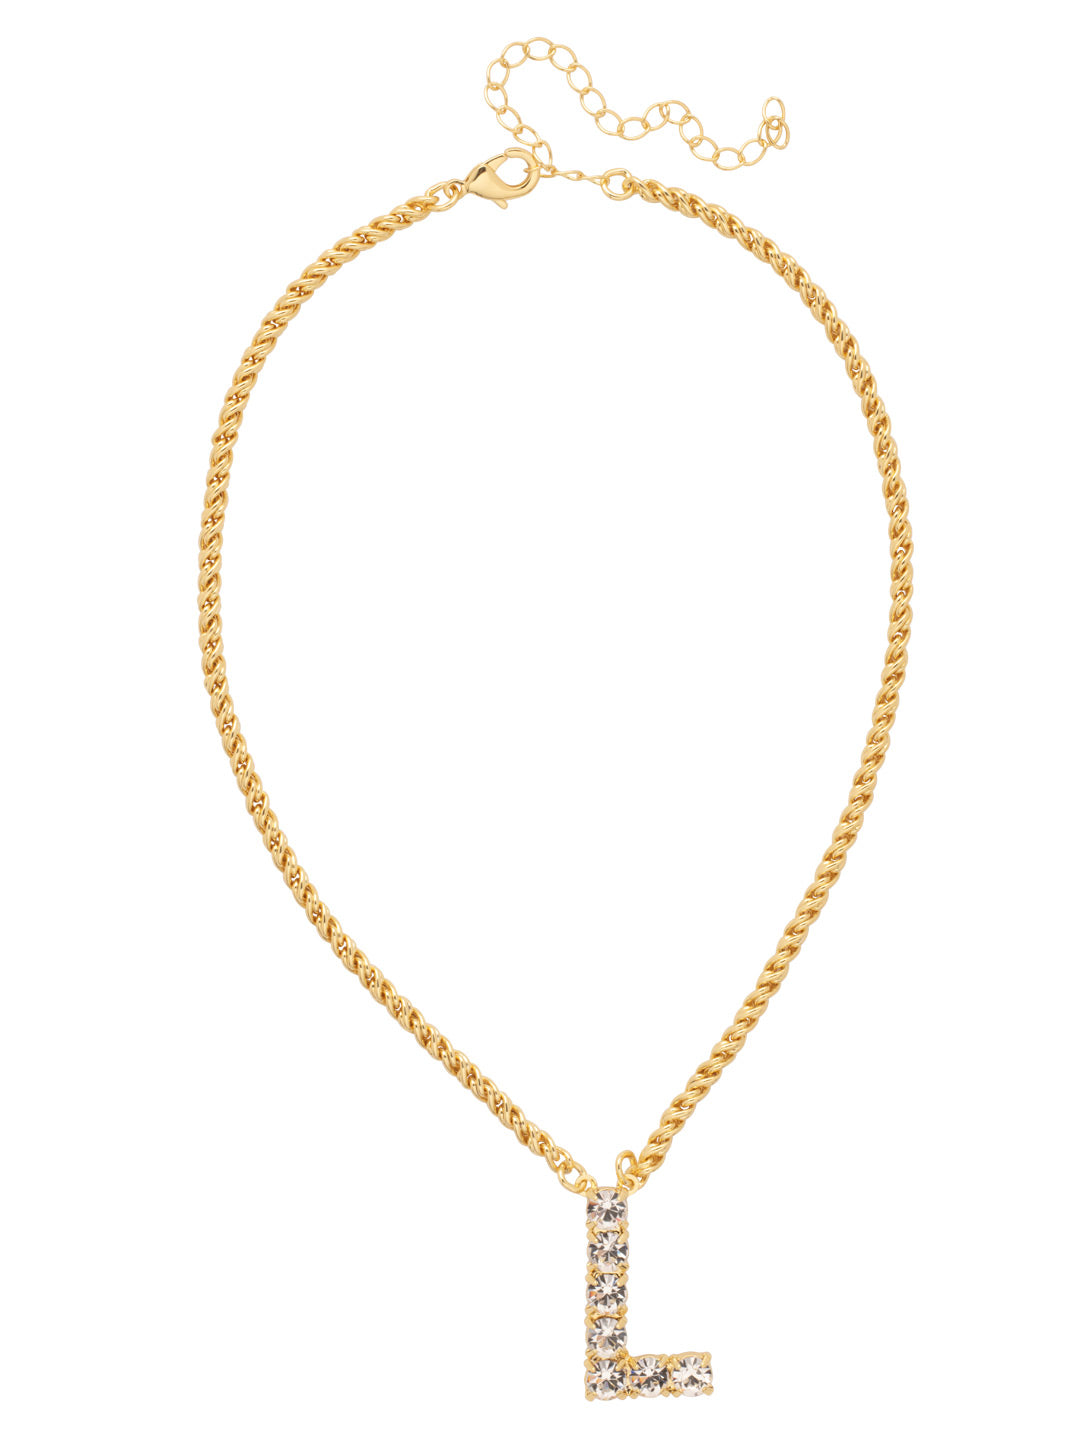 L Initial Rope Pendant Necklace - NFK31BGCRY - <p>The Initial Rope Pendant Necklace features a crystal encrusted metal monogram pendant on an adjustable rope chain, secured with a lobster claw clasp. From Sorrelli's Crystal collection in our Bright Gold-tone finish.</p>